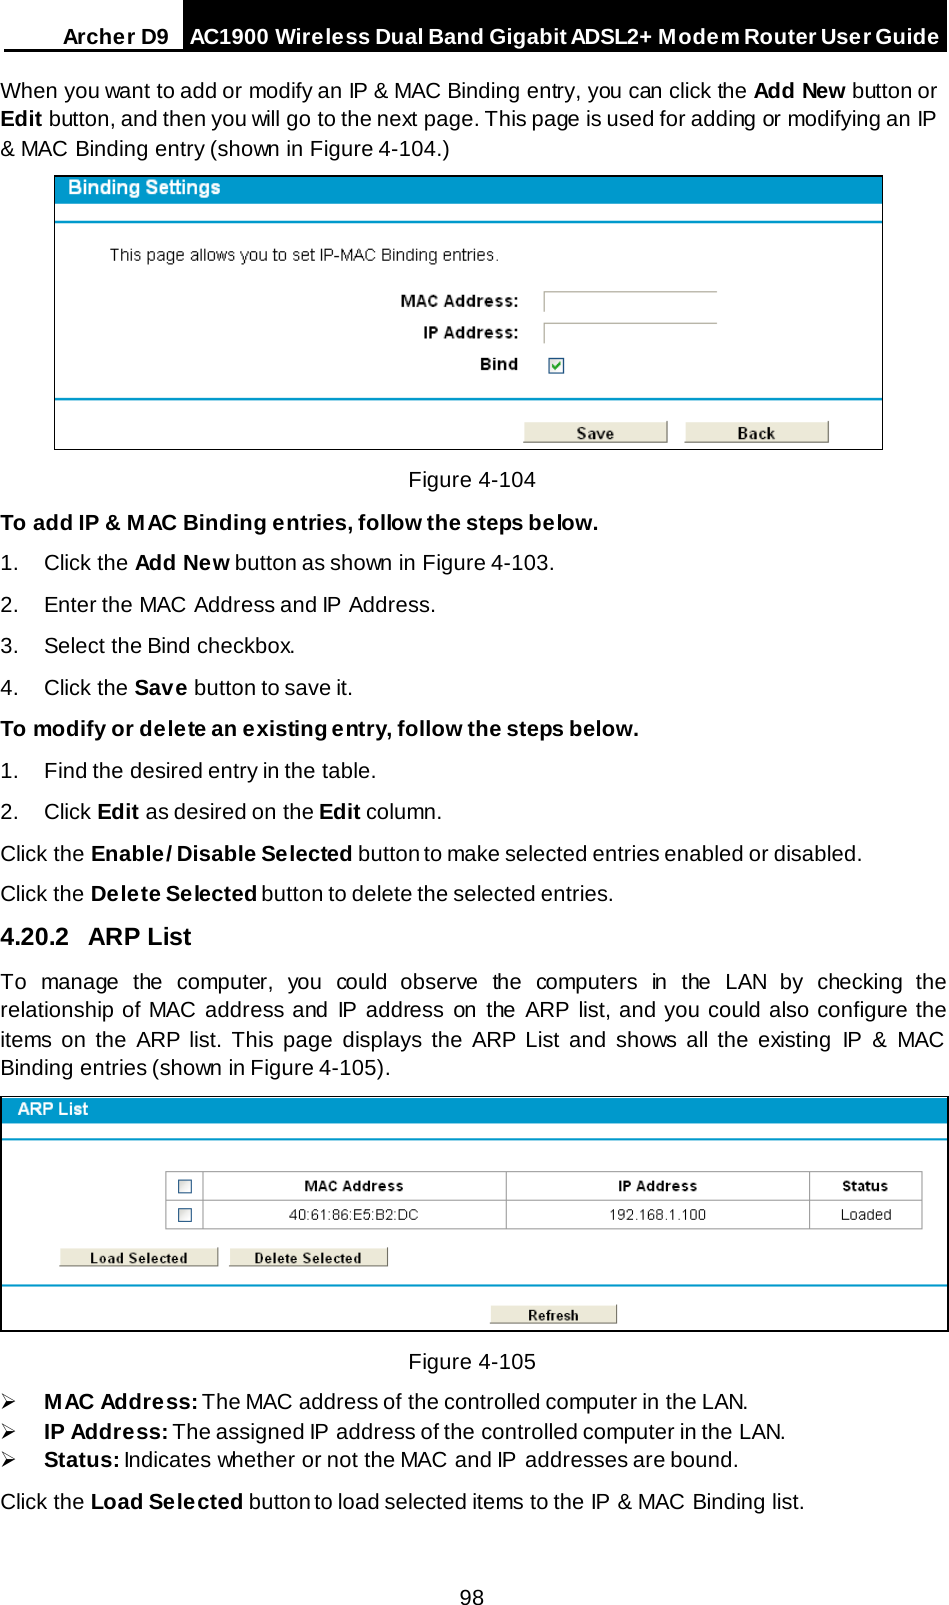 Arche r D9 AC1900 Wireless Dual Band Gigabit ADSL2+ Modem Router User Guide  When you want to add or modify an IP &amp; MAC Binding entry, you can click the Add New button or Edit button, and then you will go to the next page. This page is used for adding or modifying an IP &amp; MAC Binding entry (shown in Figure 4-104.)  Figure 4-104   To add IP &amp; MAC Binding entries, follow the steps below. 1. Click the Add New button as shown in Figure 4-103.  2. Enter the MAC Address and IP Address. 3. Select the Bind checkbox.   4. Click the Save button to save it. To modify or delete an existing entry, follow the steps below. 1. Find the desired entry in the table.   2. Click Edit as desired on the Edit column.   Click the Enable/ Disable Selected button to make selected entries enabled or disabled. Click the Delete Selected button to delete the selected entries. 4.20.2 ARP List To manage the computer, you could observe the computers in the LAN by checking the relationship of MAC address and IP address on the ARP list, and you could also configure the items on the ARP list. This page displays the ARP List and  shows all the existing IP &amp; MAC Binding entries (shown in Figure 4-105).  Figure 4-105  MAC Addre ss: The MAC address of the controlled computer in the LAN.    IP Address: The assigned IP  address of the controlled computer in the LAN.    Status: Indicates whether or not the MAC and IP  addresses are bound. Click the Load Selected button to load selected items to the IP &amp; MAC Binding list. 98 